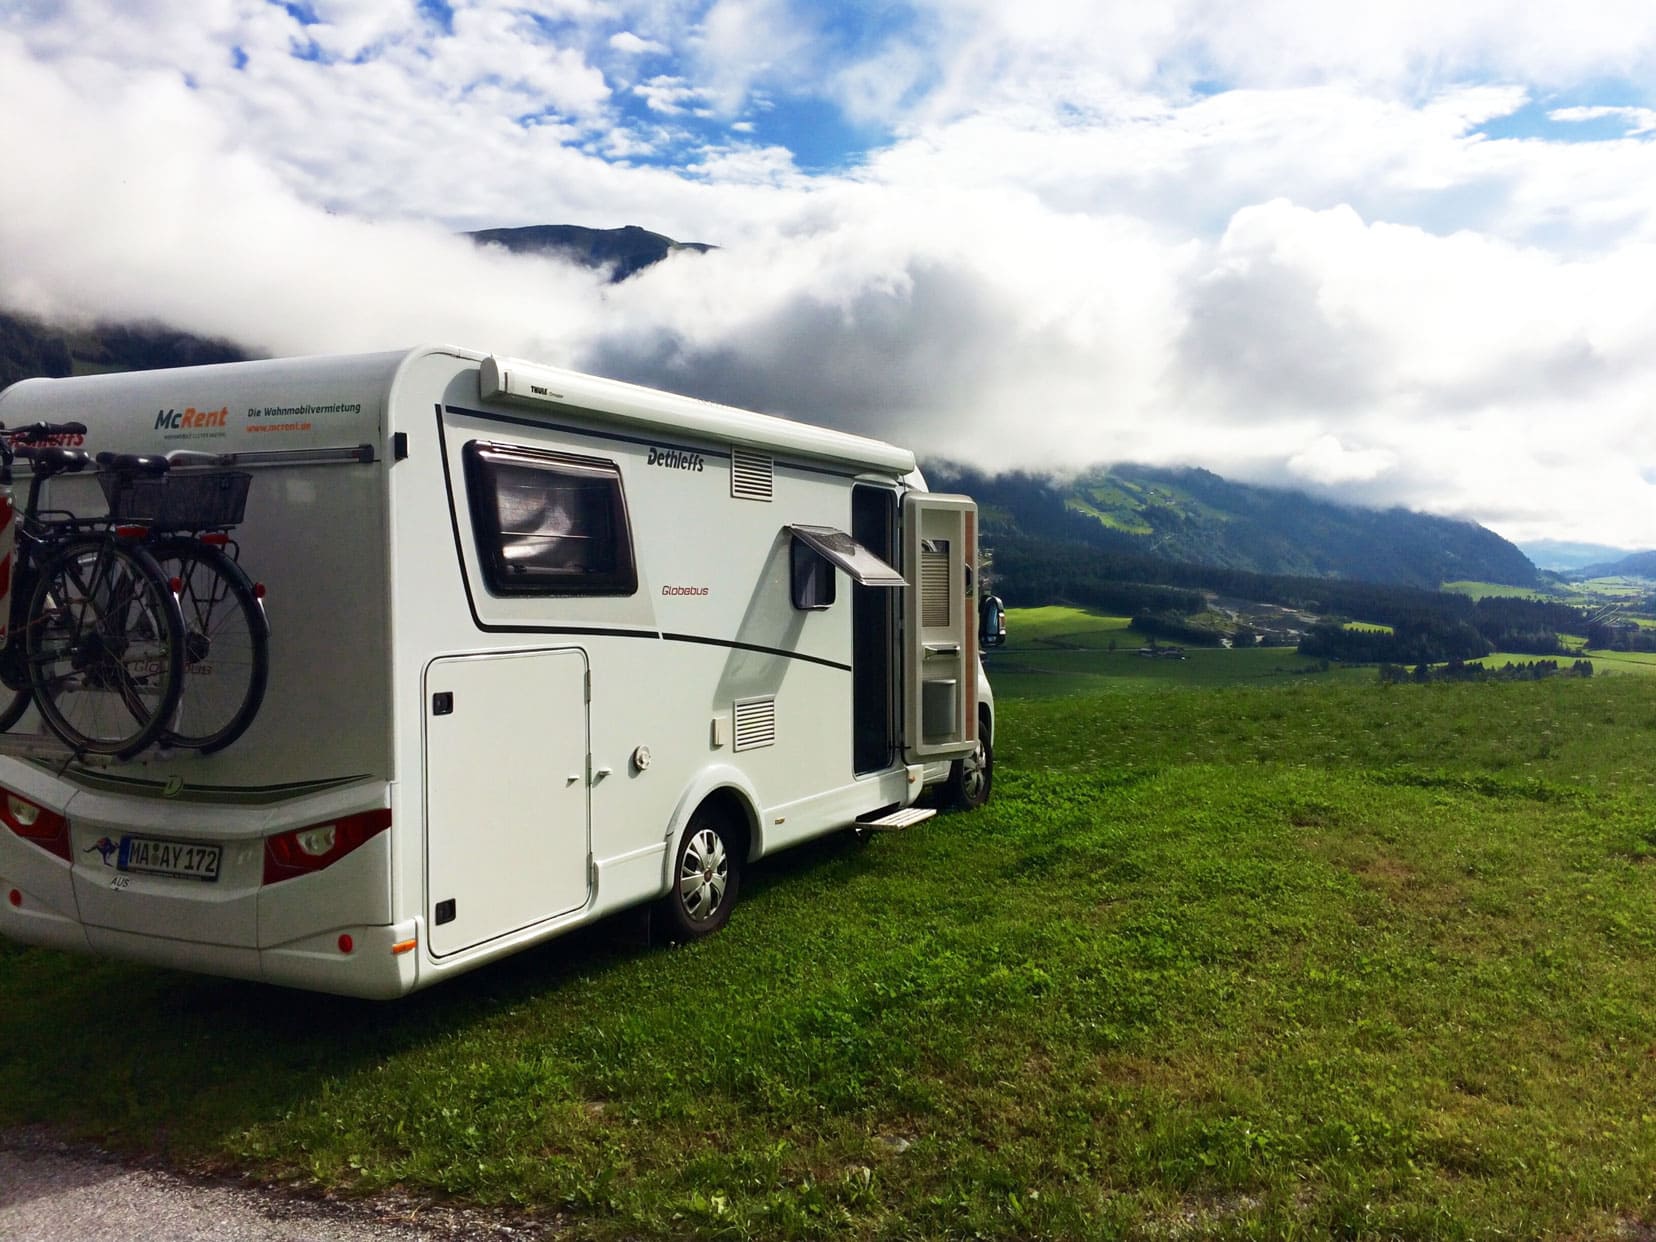 motorhome parked on a green hill with mountains in the background